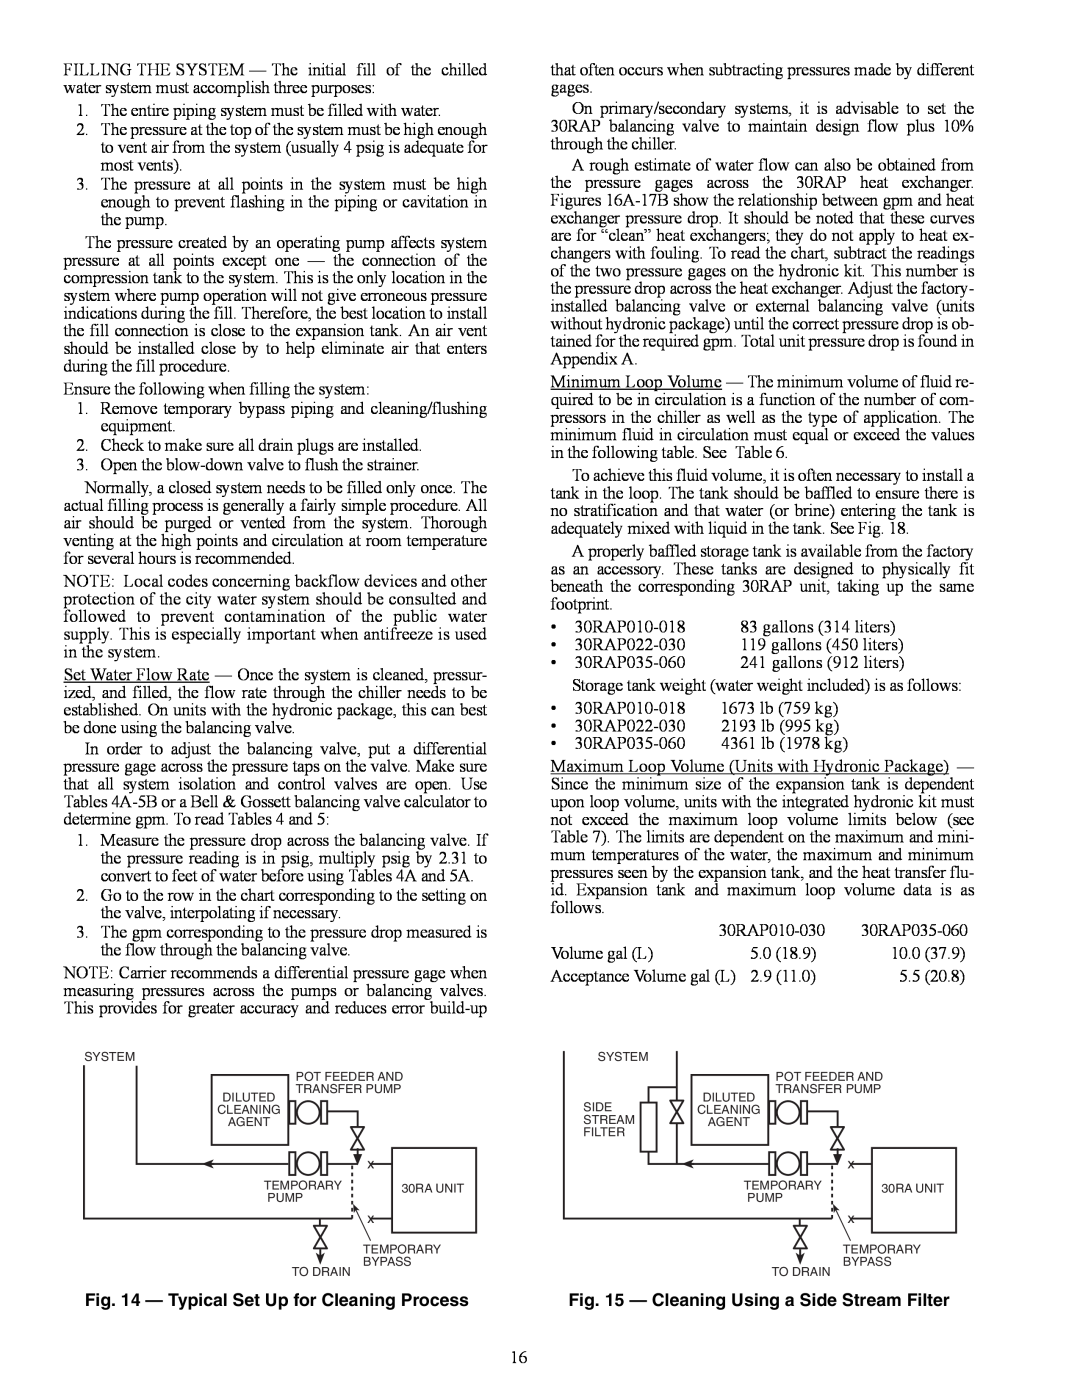 Carrier 30RAP010-060 installation instructions Typical Set Up for Cleaning Process, Cleaning Using a Side Stream Filter 